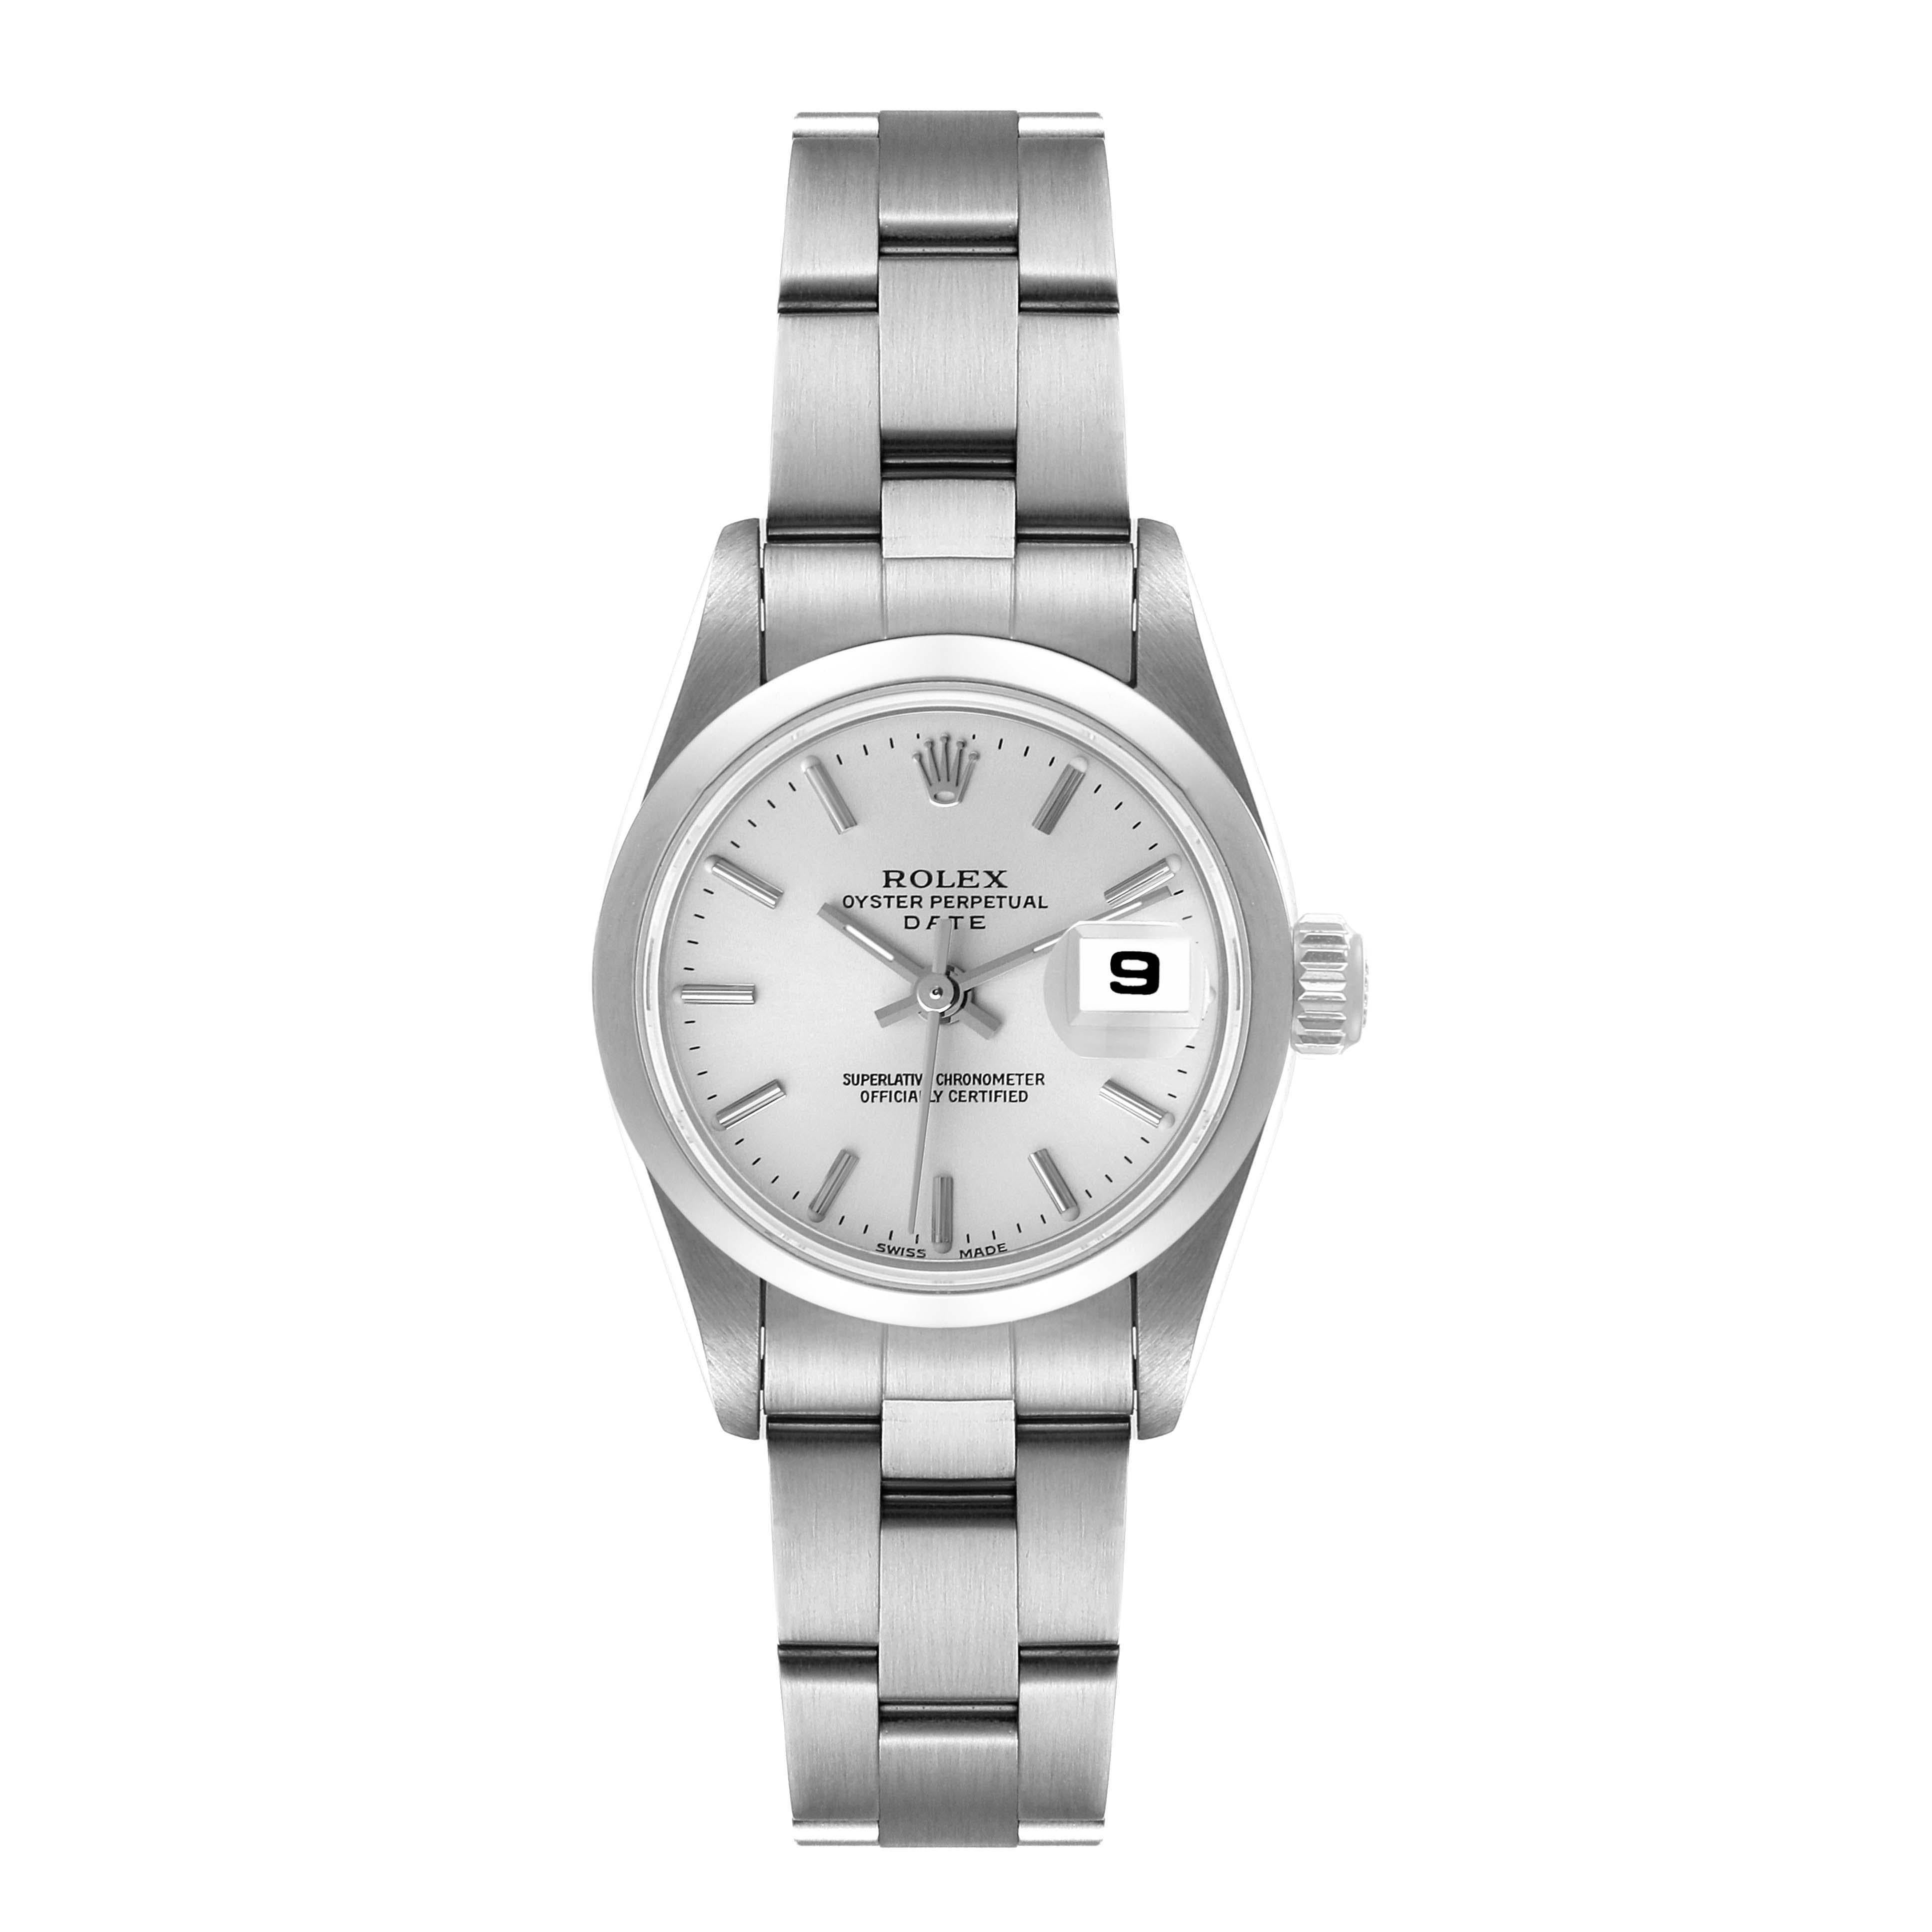 Rolex Date Silver Dial Oyster Bracelet Steel Ladies Watch 79160. Officially certified chronometer self-winding movement. Stainless steel oyster case 26.0 mm in diameter. Rolex logo on a crown. Stainless steel smooth bezel. Scratch resistant sapphire